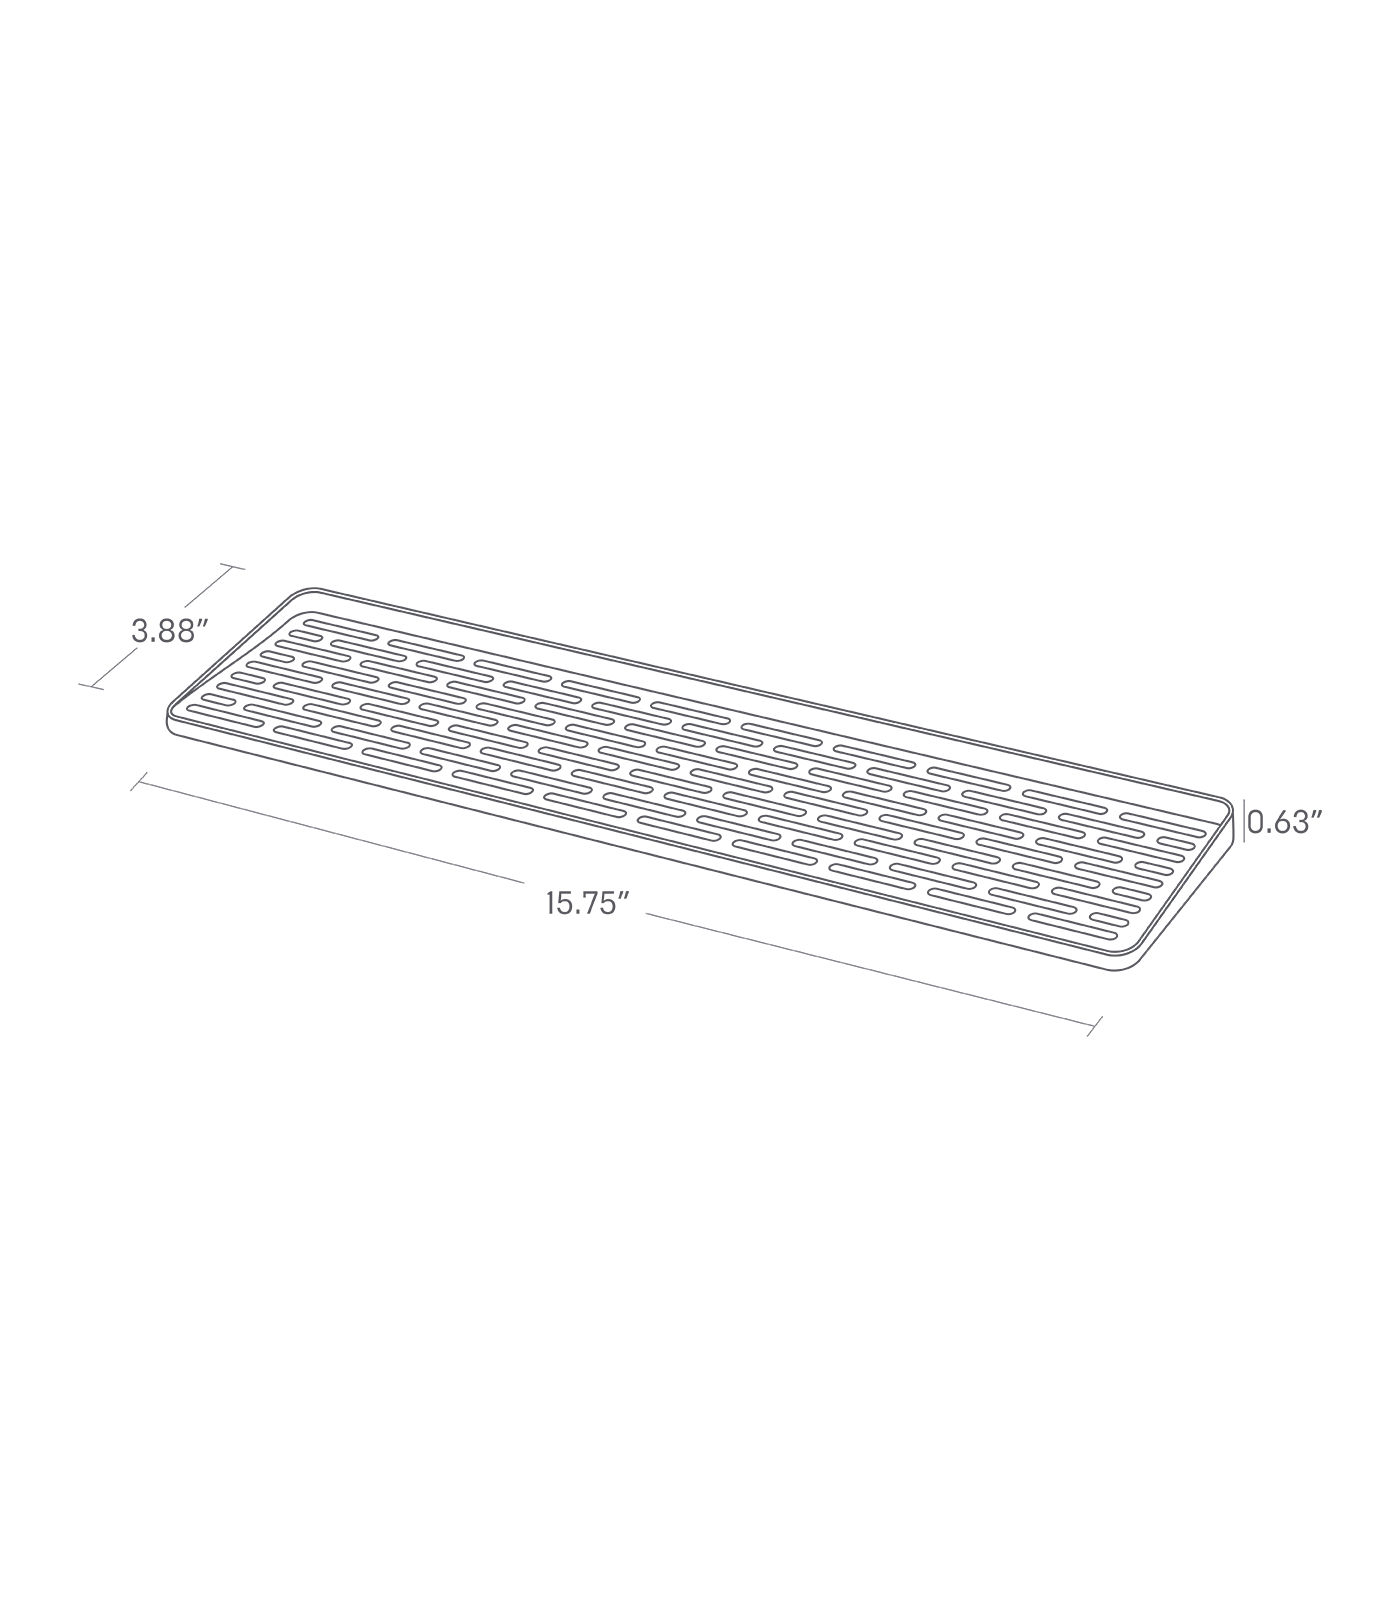 Dimension image for Sink Drainer Tray showing a total length of 15.75